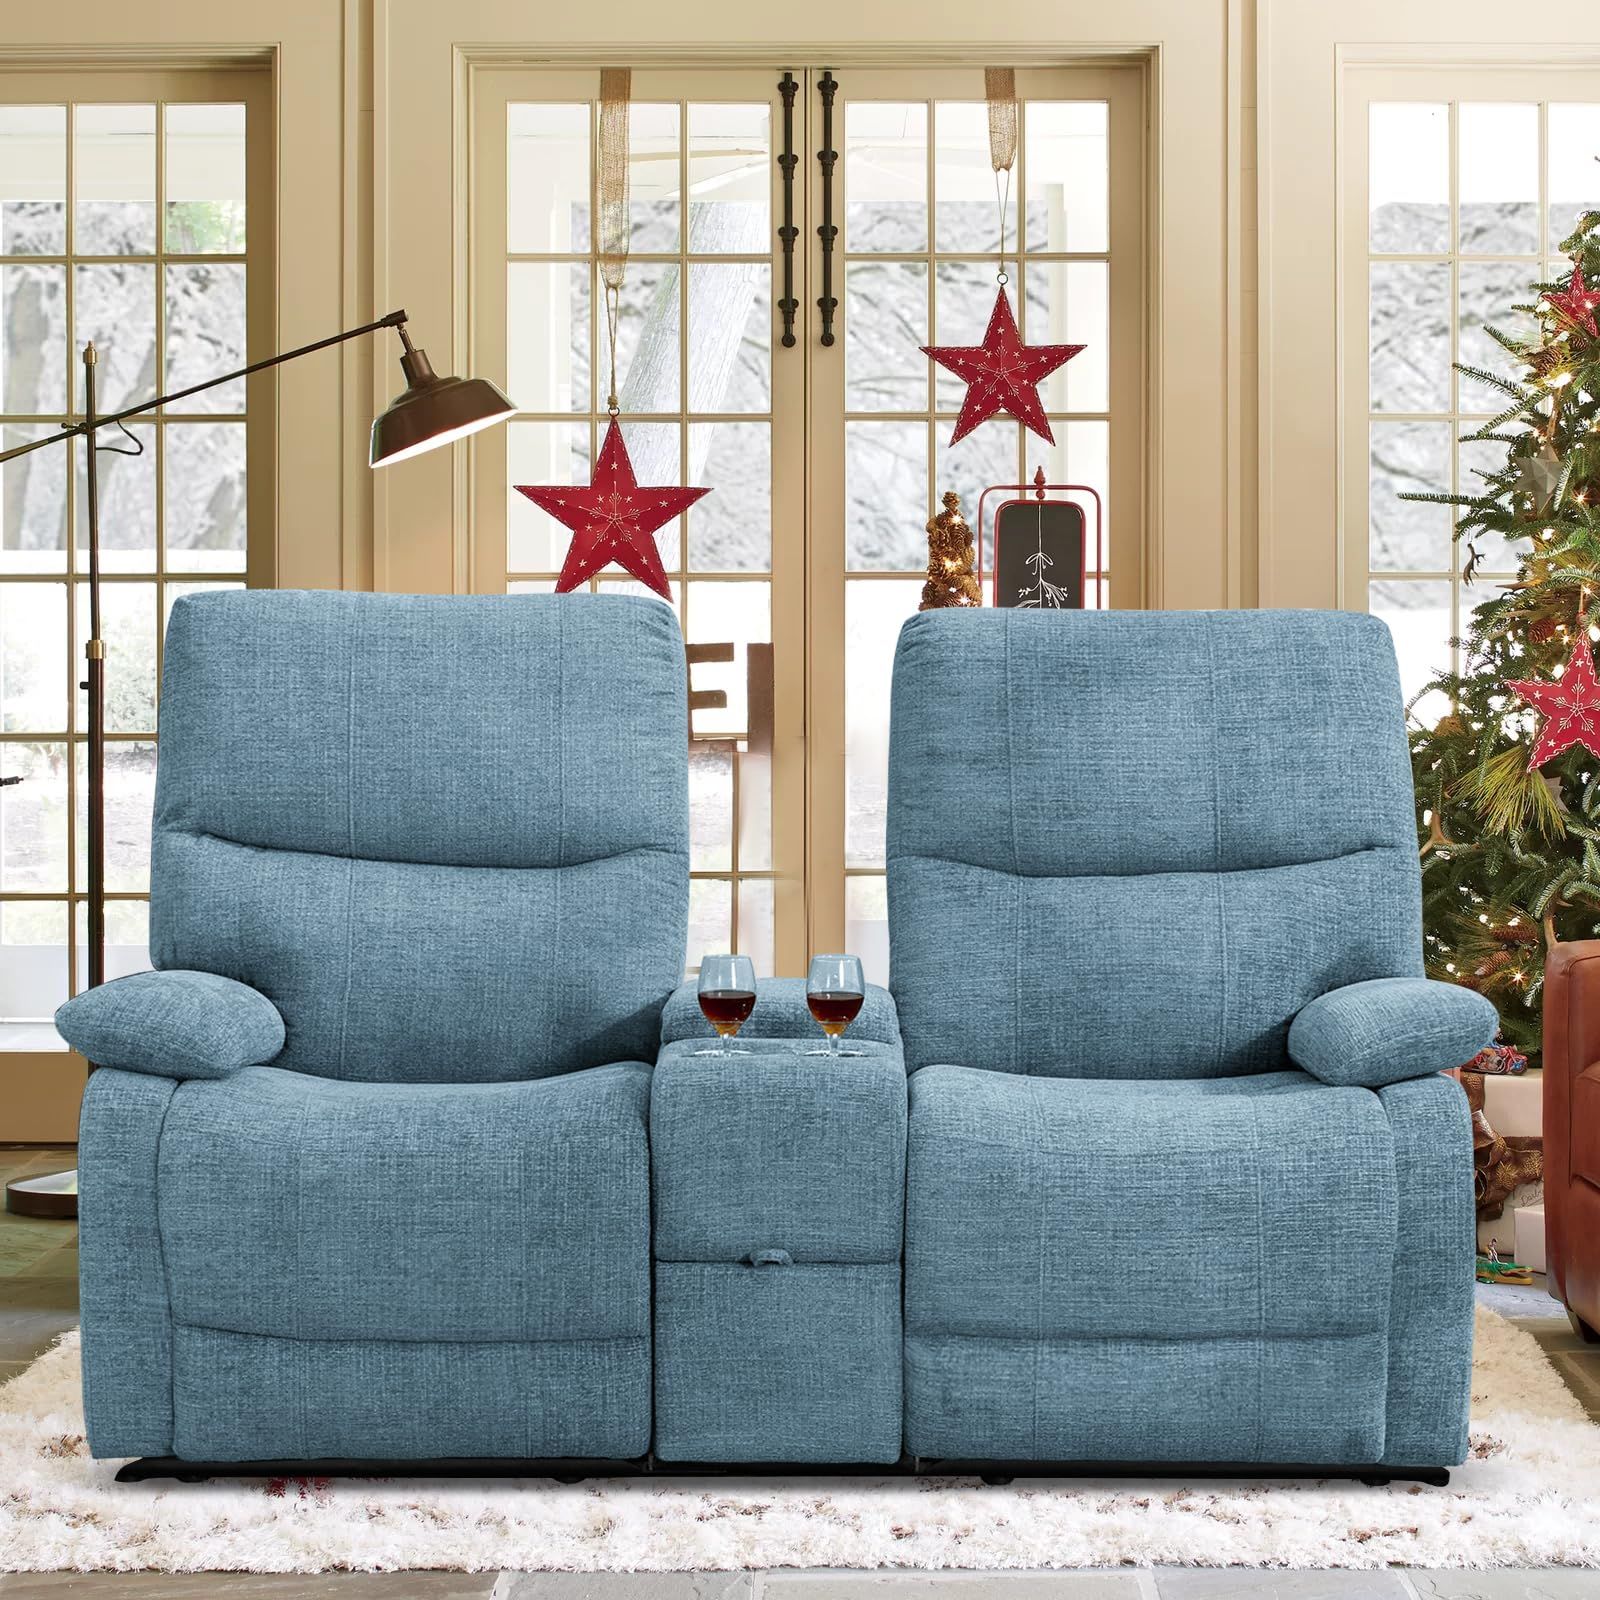 The Ultimate Comfort: Reclining Sofa And Loveseat for Everyday Relaxation